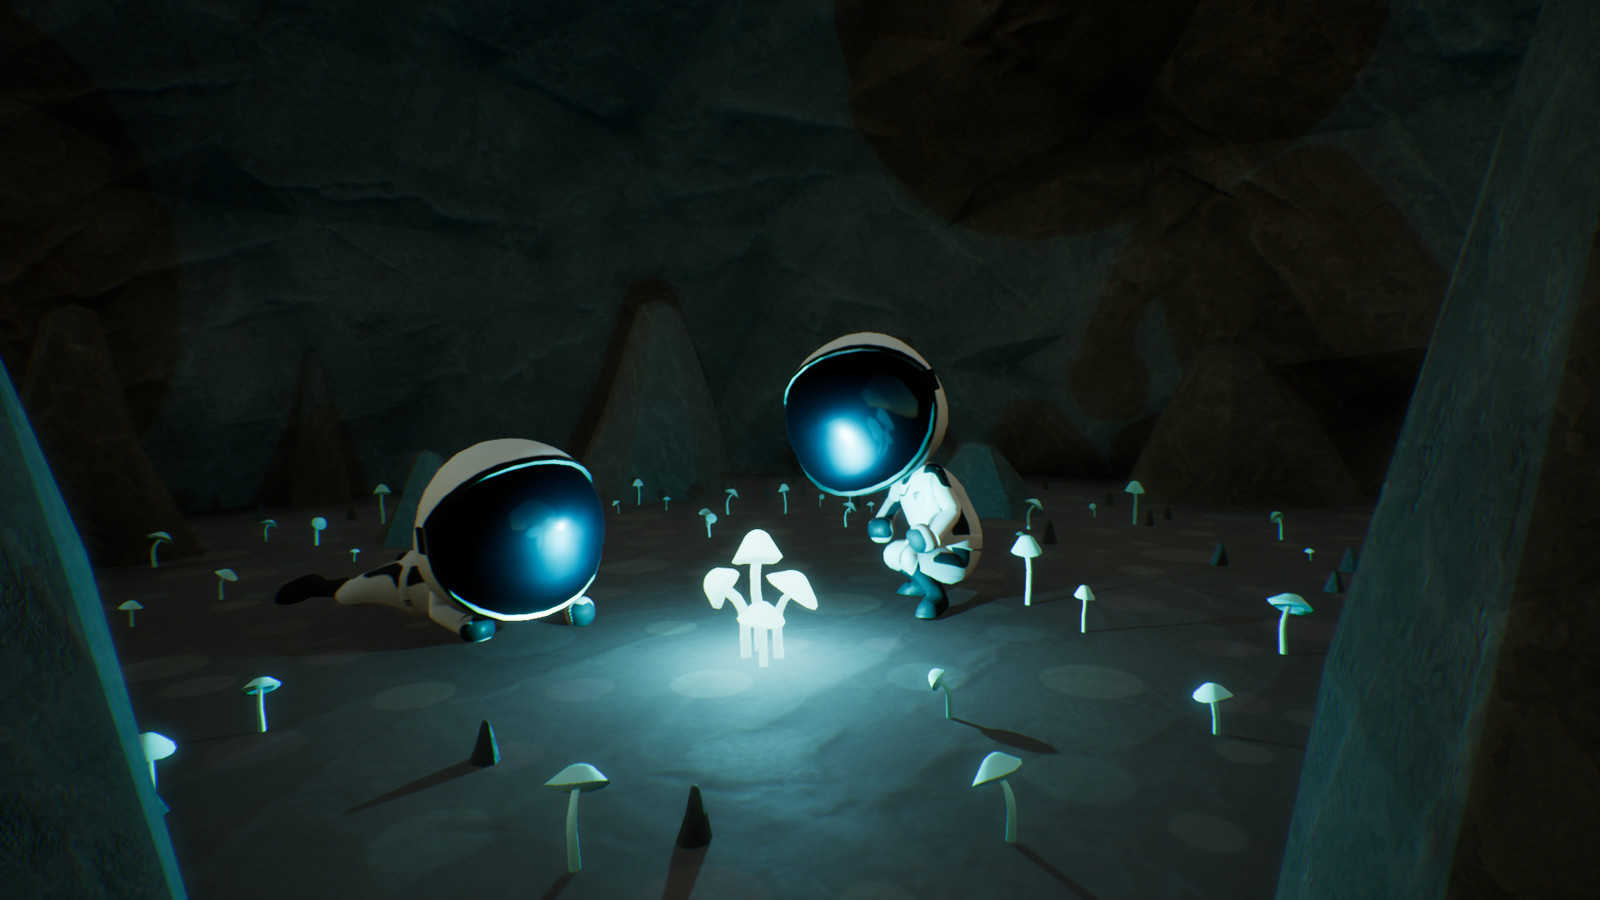 February's theme-from-a-hat challenge: Sci-Fi + Caves + Animal Crossing. Final shot in UE4